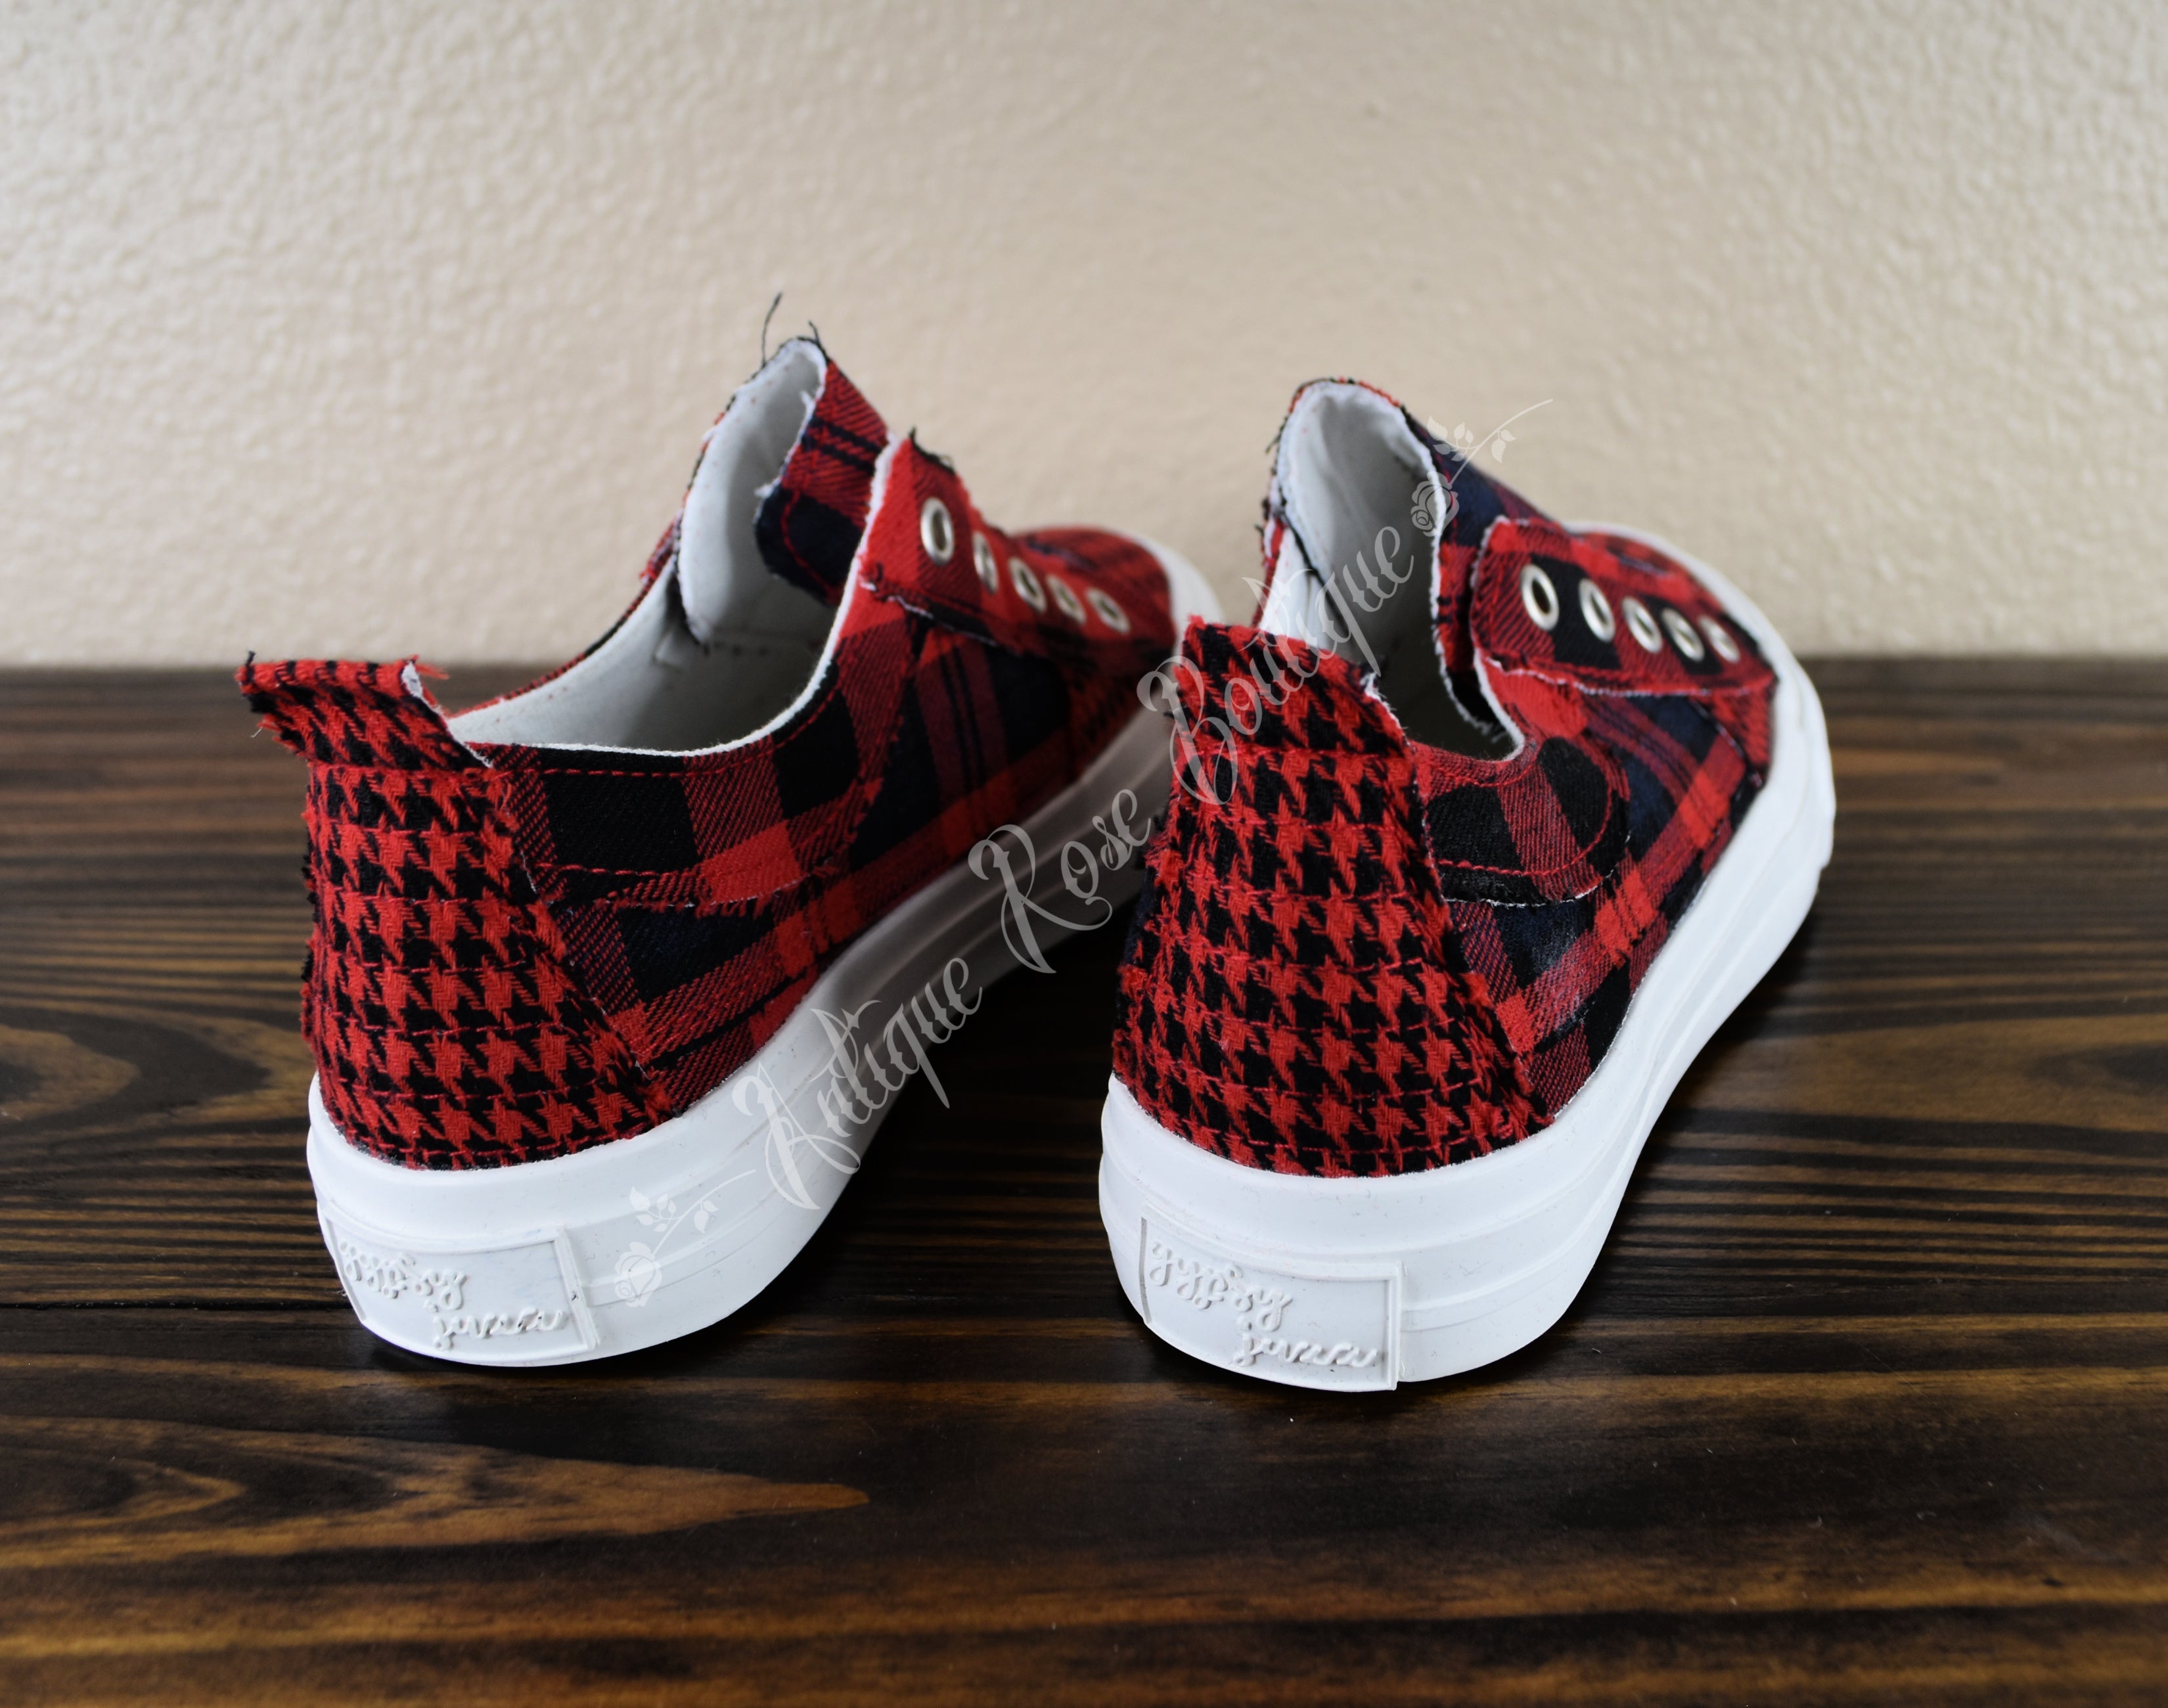 Very G Gypsy Jazz Red And Black Mix Fashion Sneakers